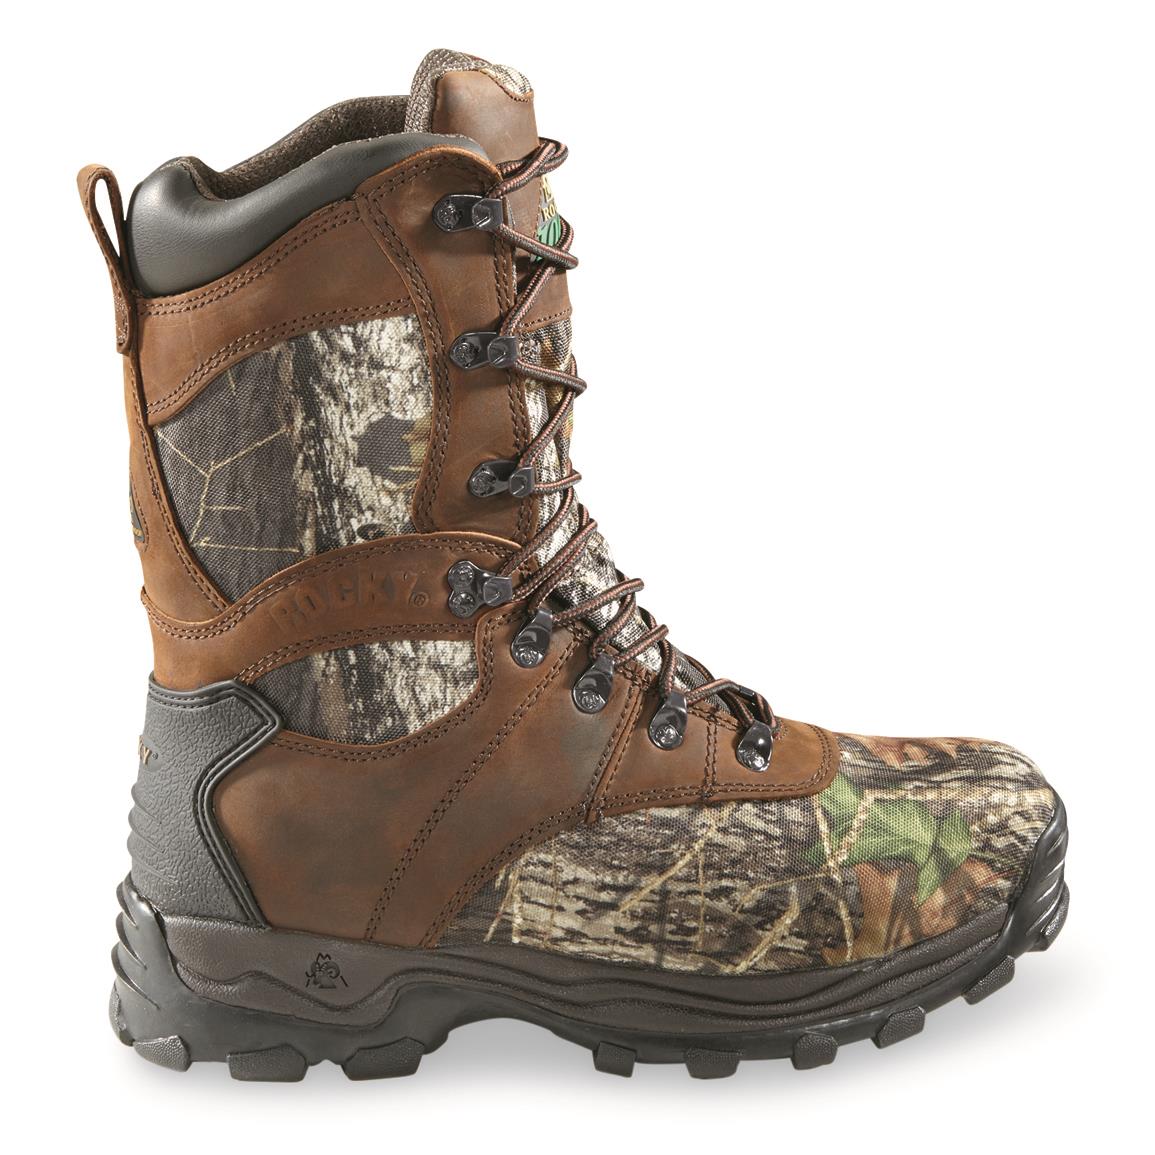 1000 Gram Insulated Hunting Boots | Sportsman's Guide